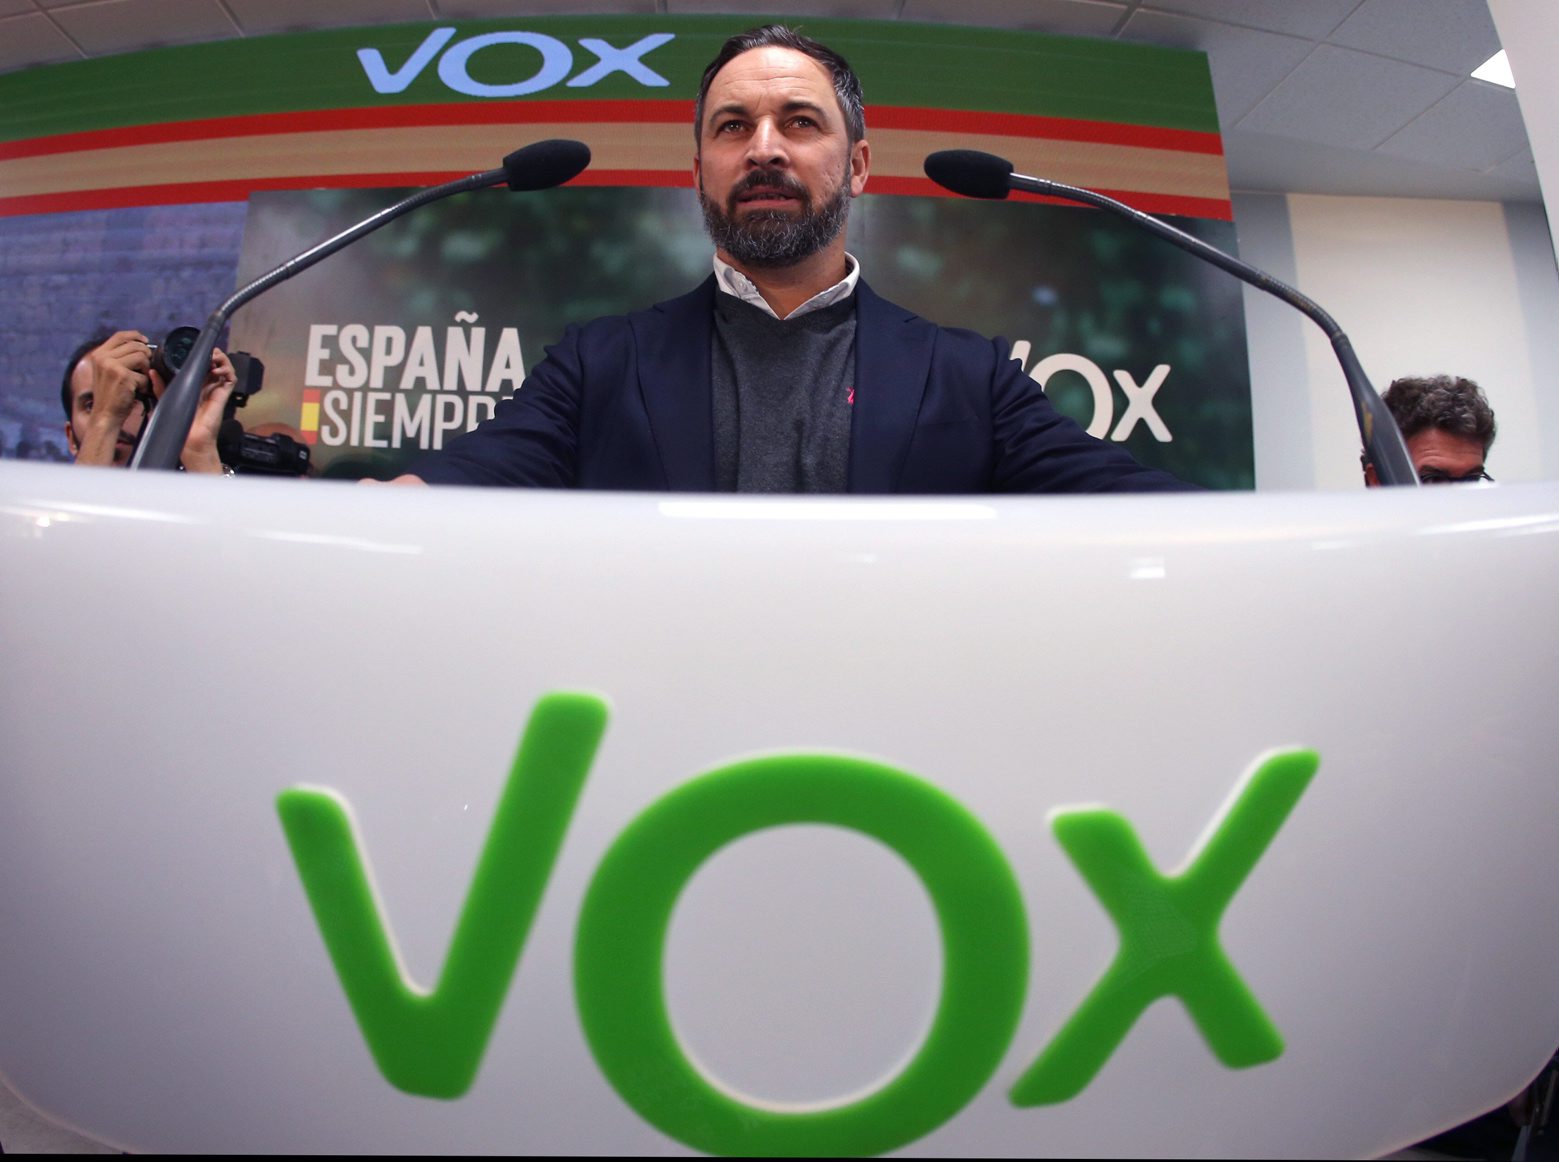 epa07988932 President of Vox party Santiago Abascal addresses a press conference after the meeting of Vox's national executive committee to analyze the election results gained by PSOE party in the Spanish general election, in Madrid, Spain, 11 November 2019.  EPA/Javier Lizon SPAIN GENERAL ELECTION